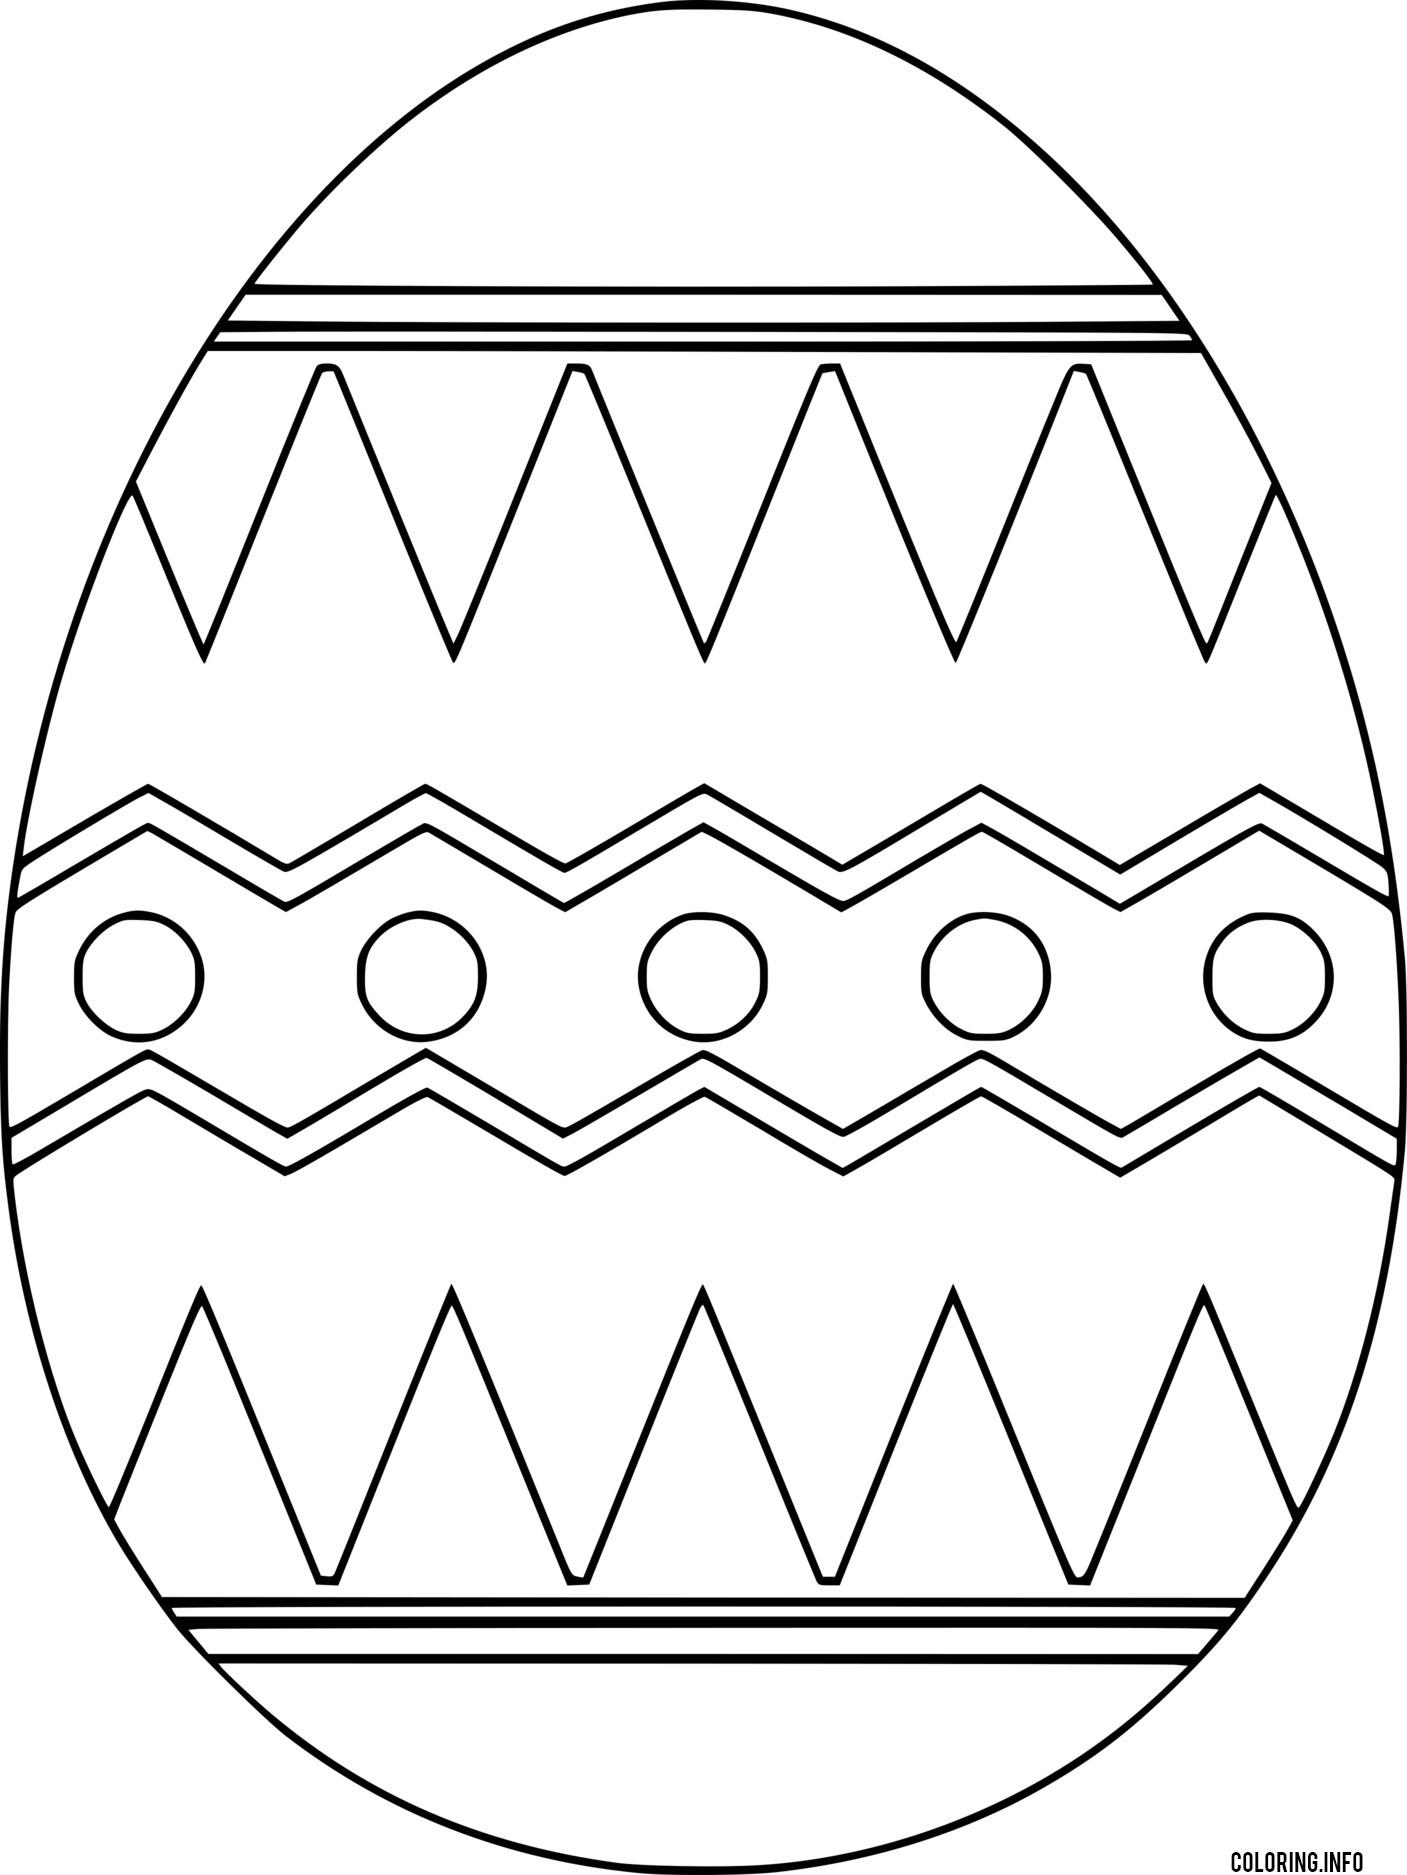 Easter Egg With Symmetrical Patterns coloring